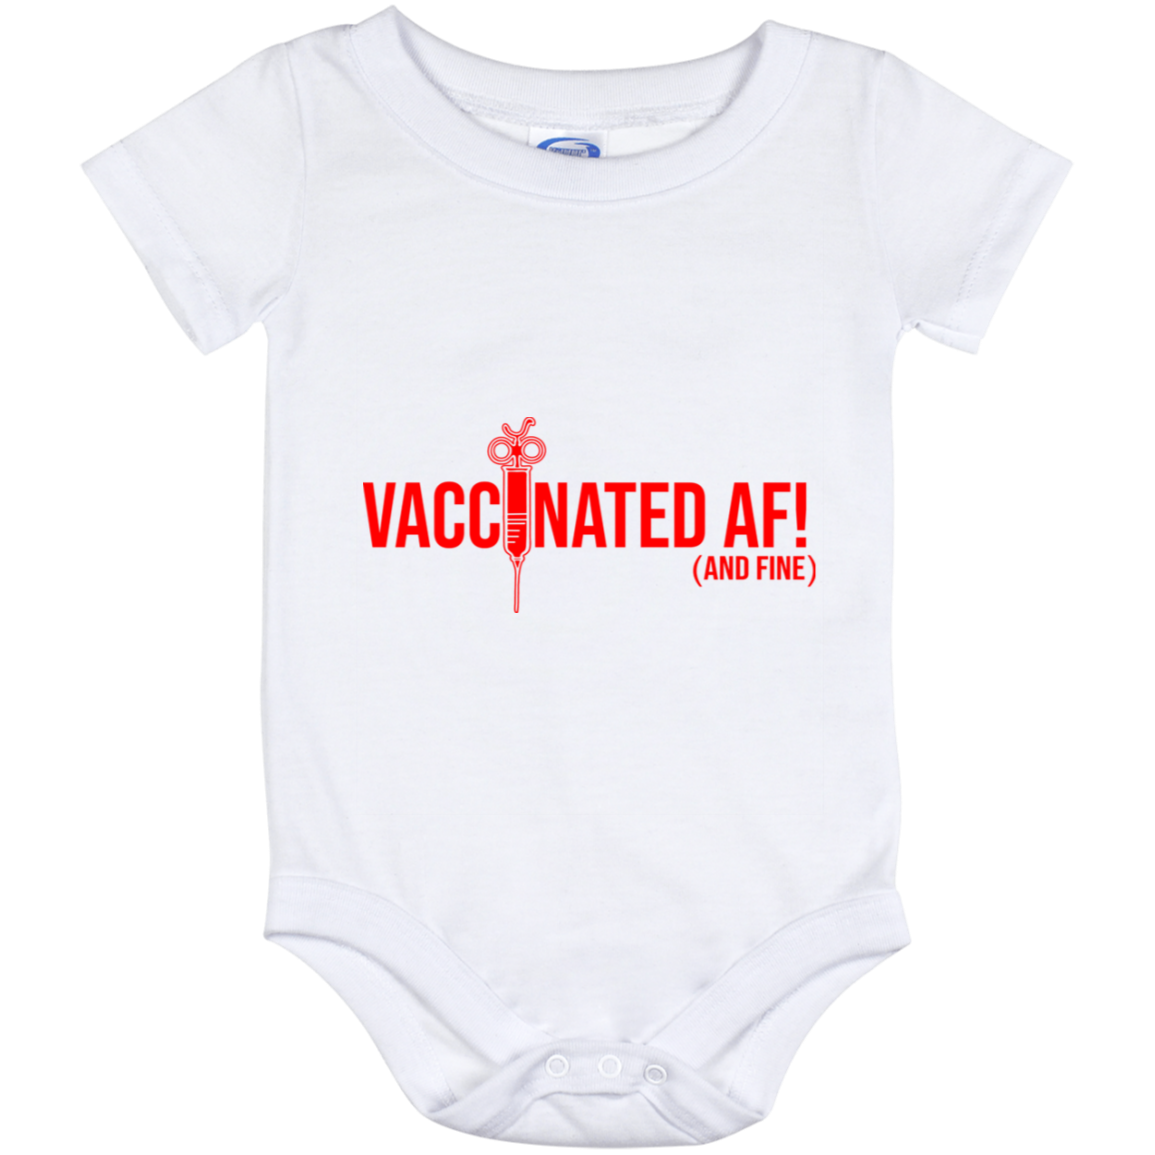 ArtichokeUSA Custom Design. Vaccinated AF (and fine). Baby Onesie 12 Month